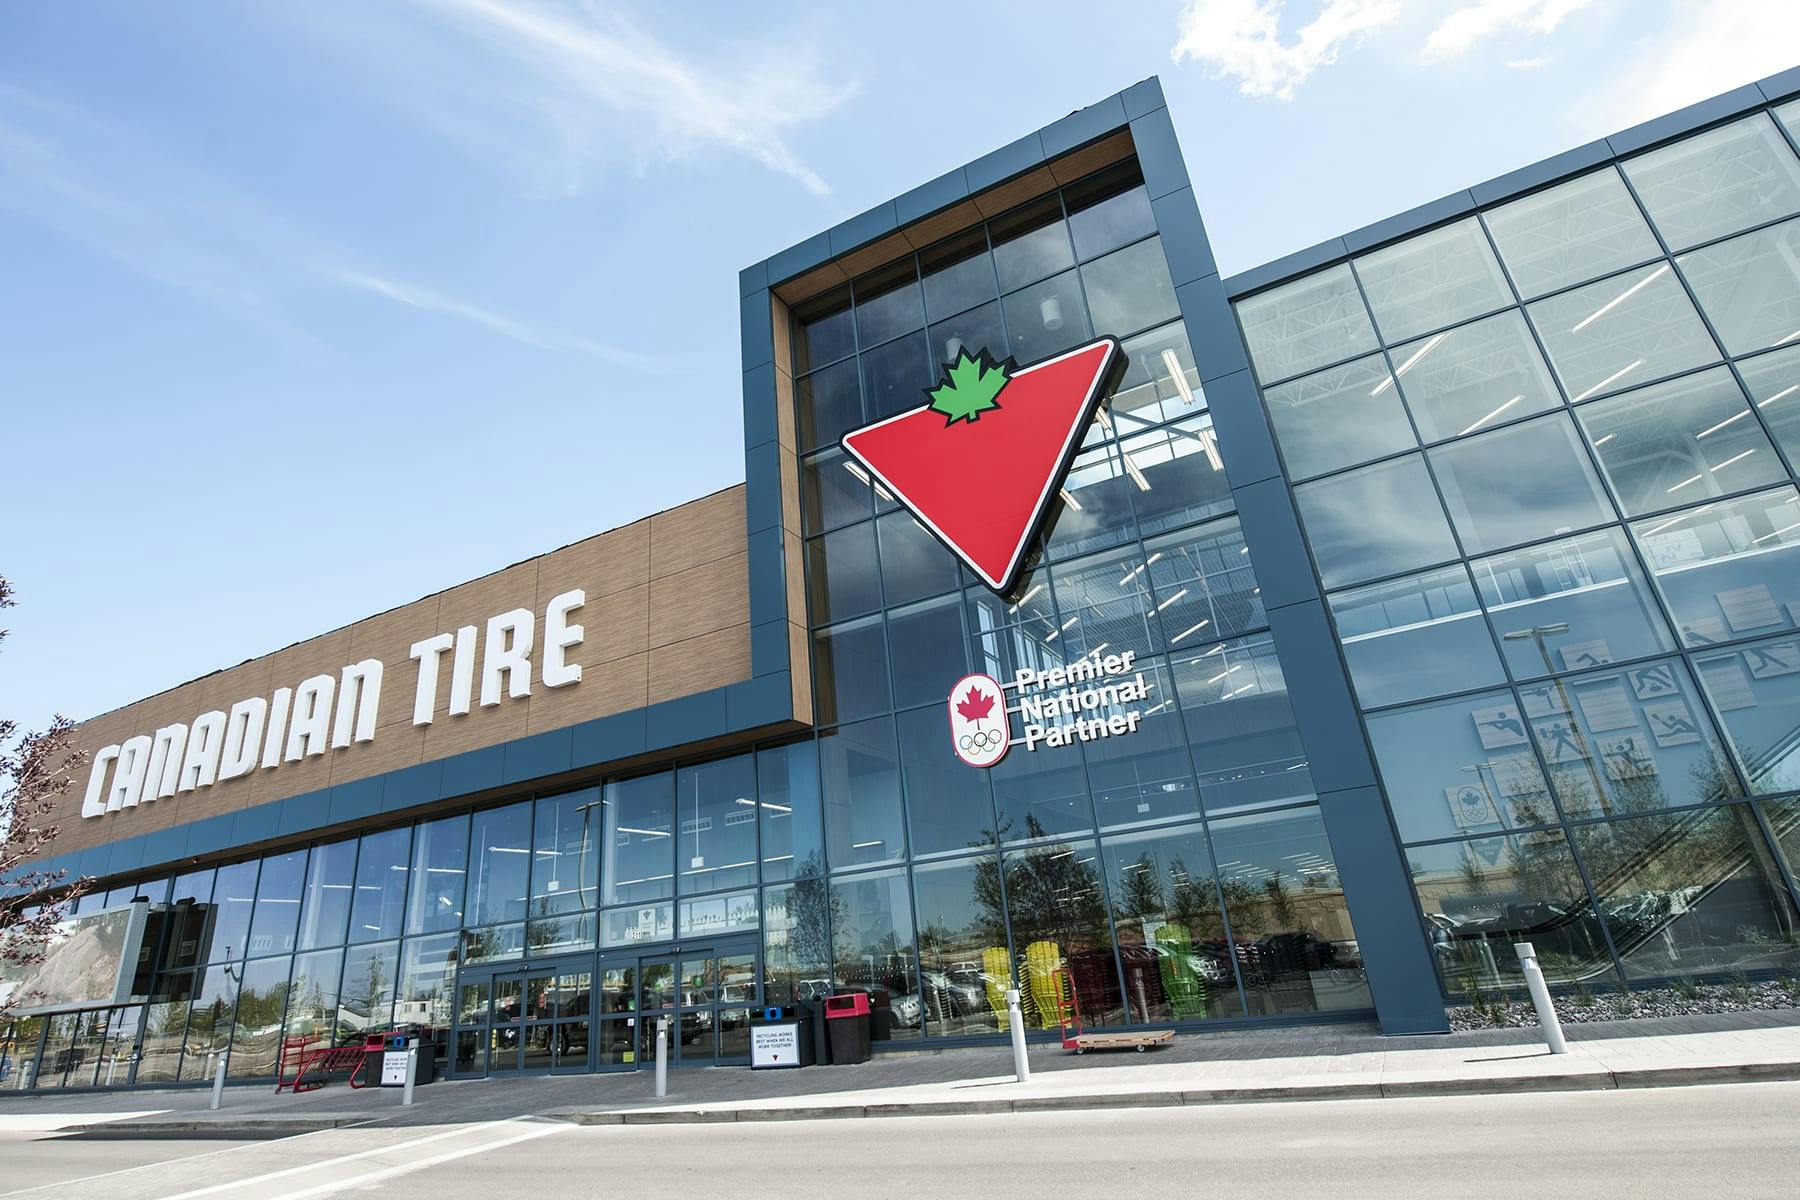 The Best Canadian Tire Mastercard in Canada